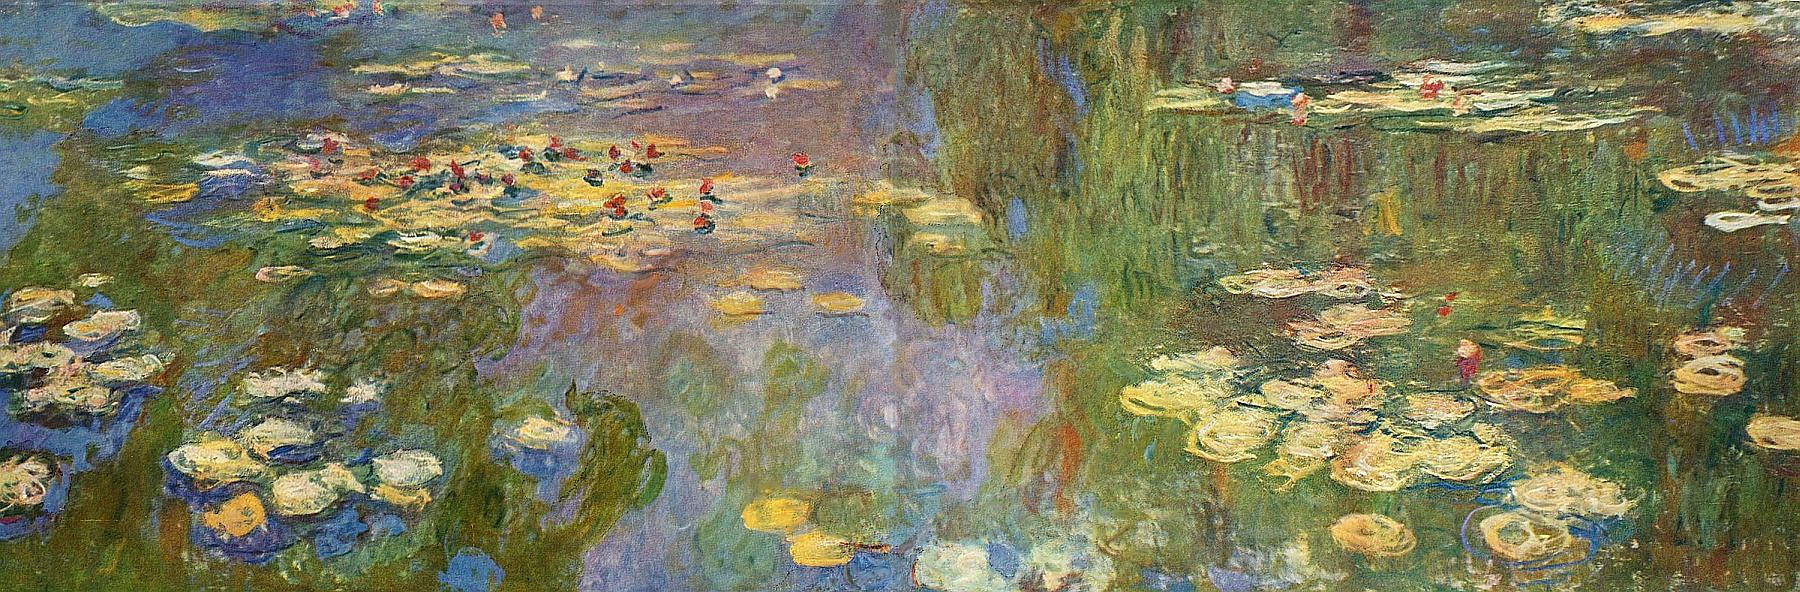 Water Lilies 1926